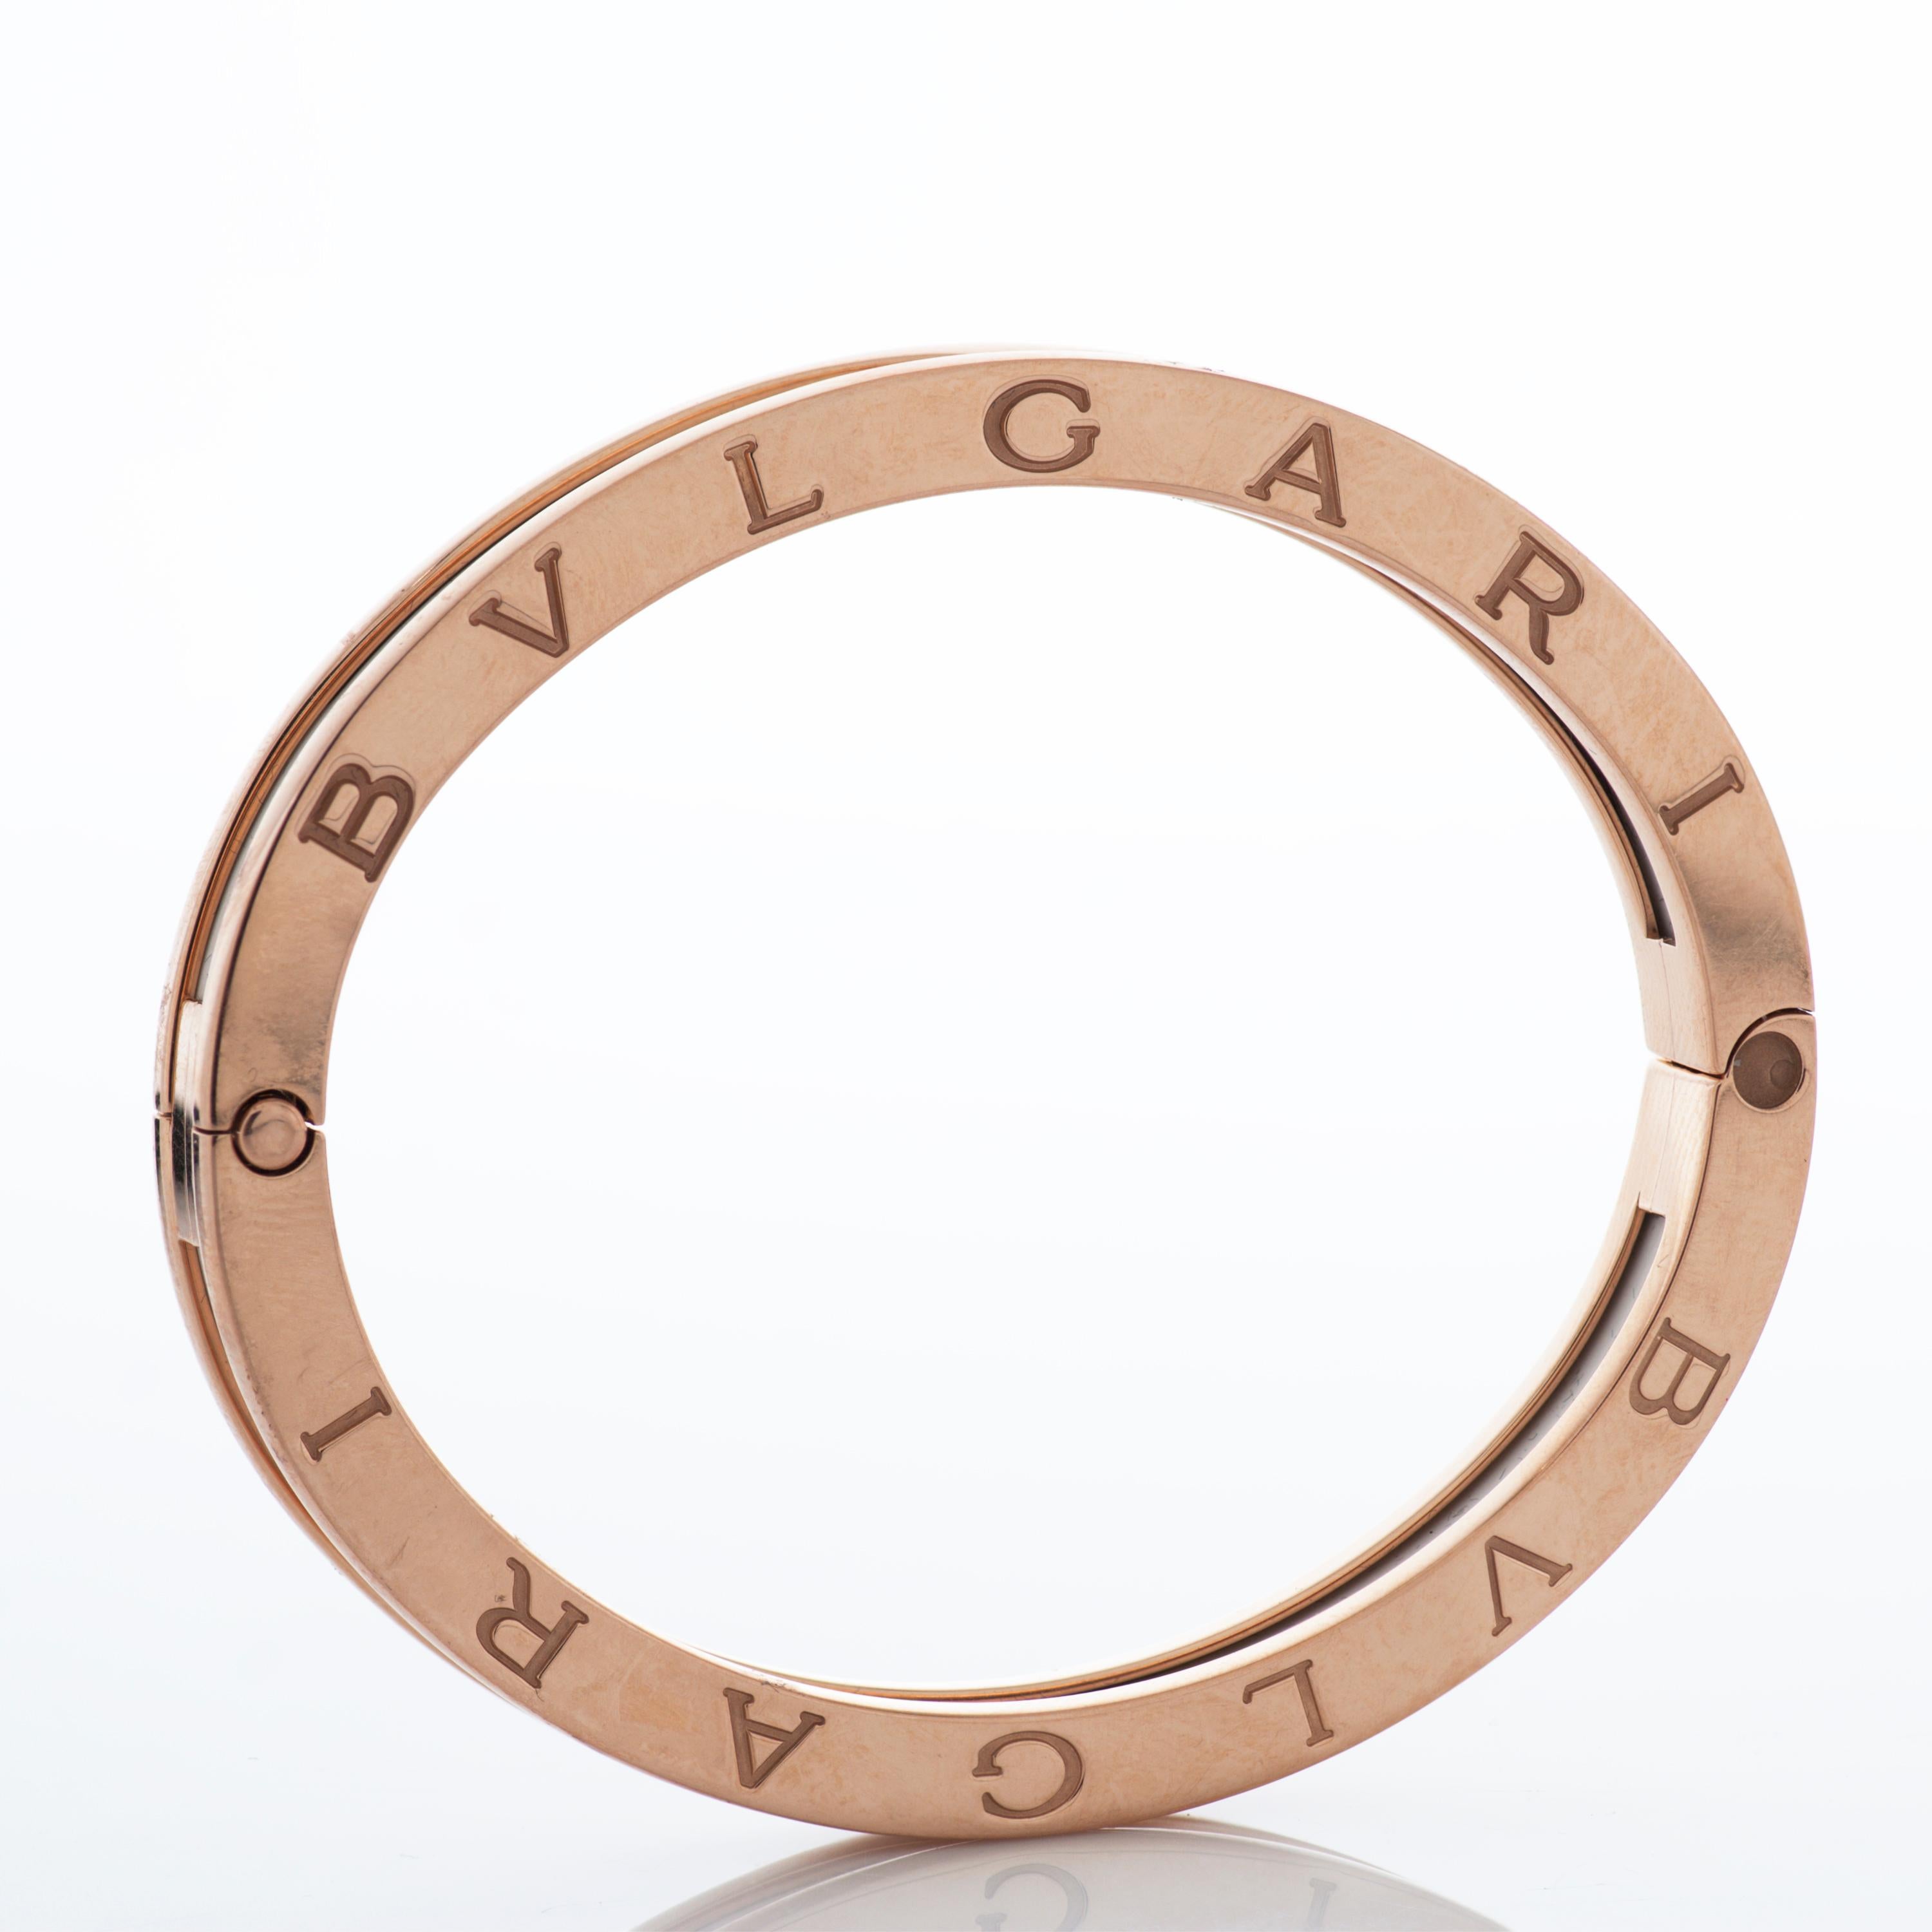 Bvlgari bangle bracelet from the B.Zero1 collection.

This bangle features a white ceramic band set inside of 18k rose gold with the Bvlgari name prominently displayed on each side.

Size medium (17cm), approximately 7.5mm wide.  

48.6